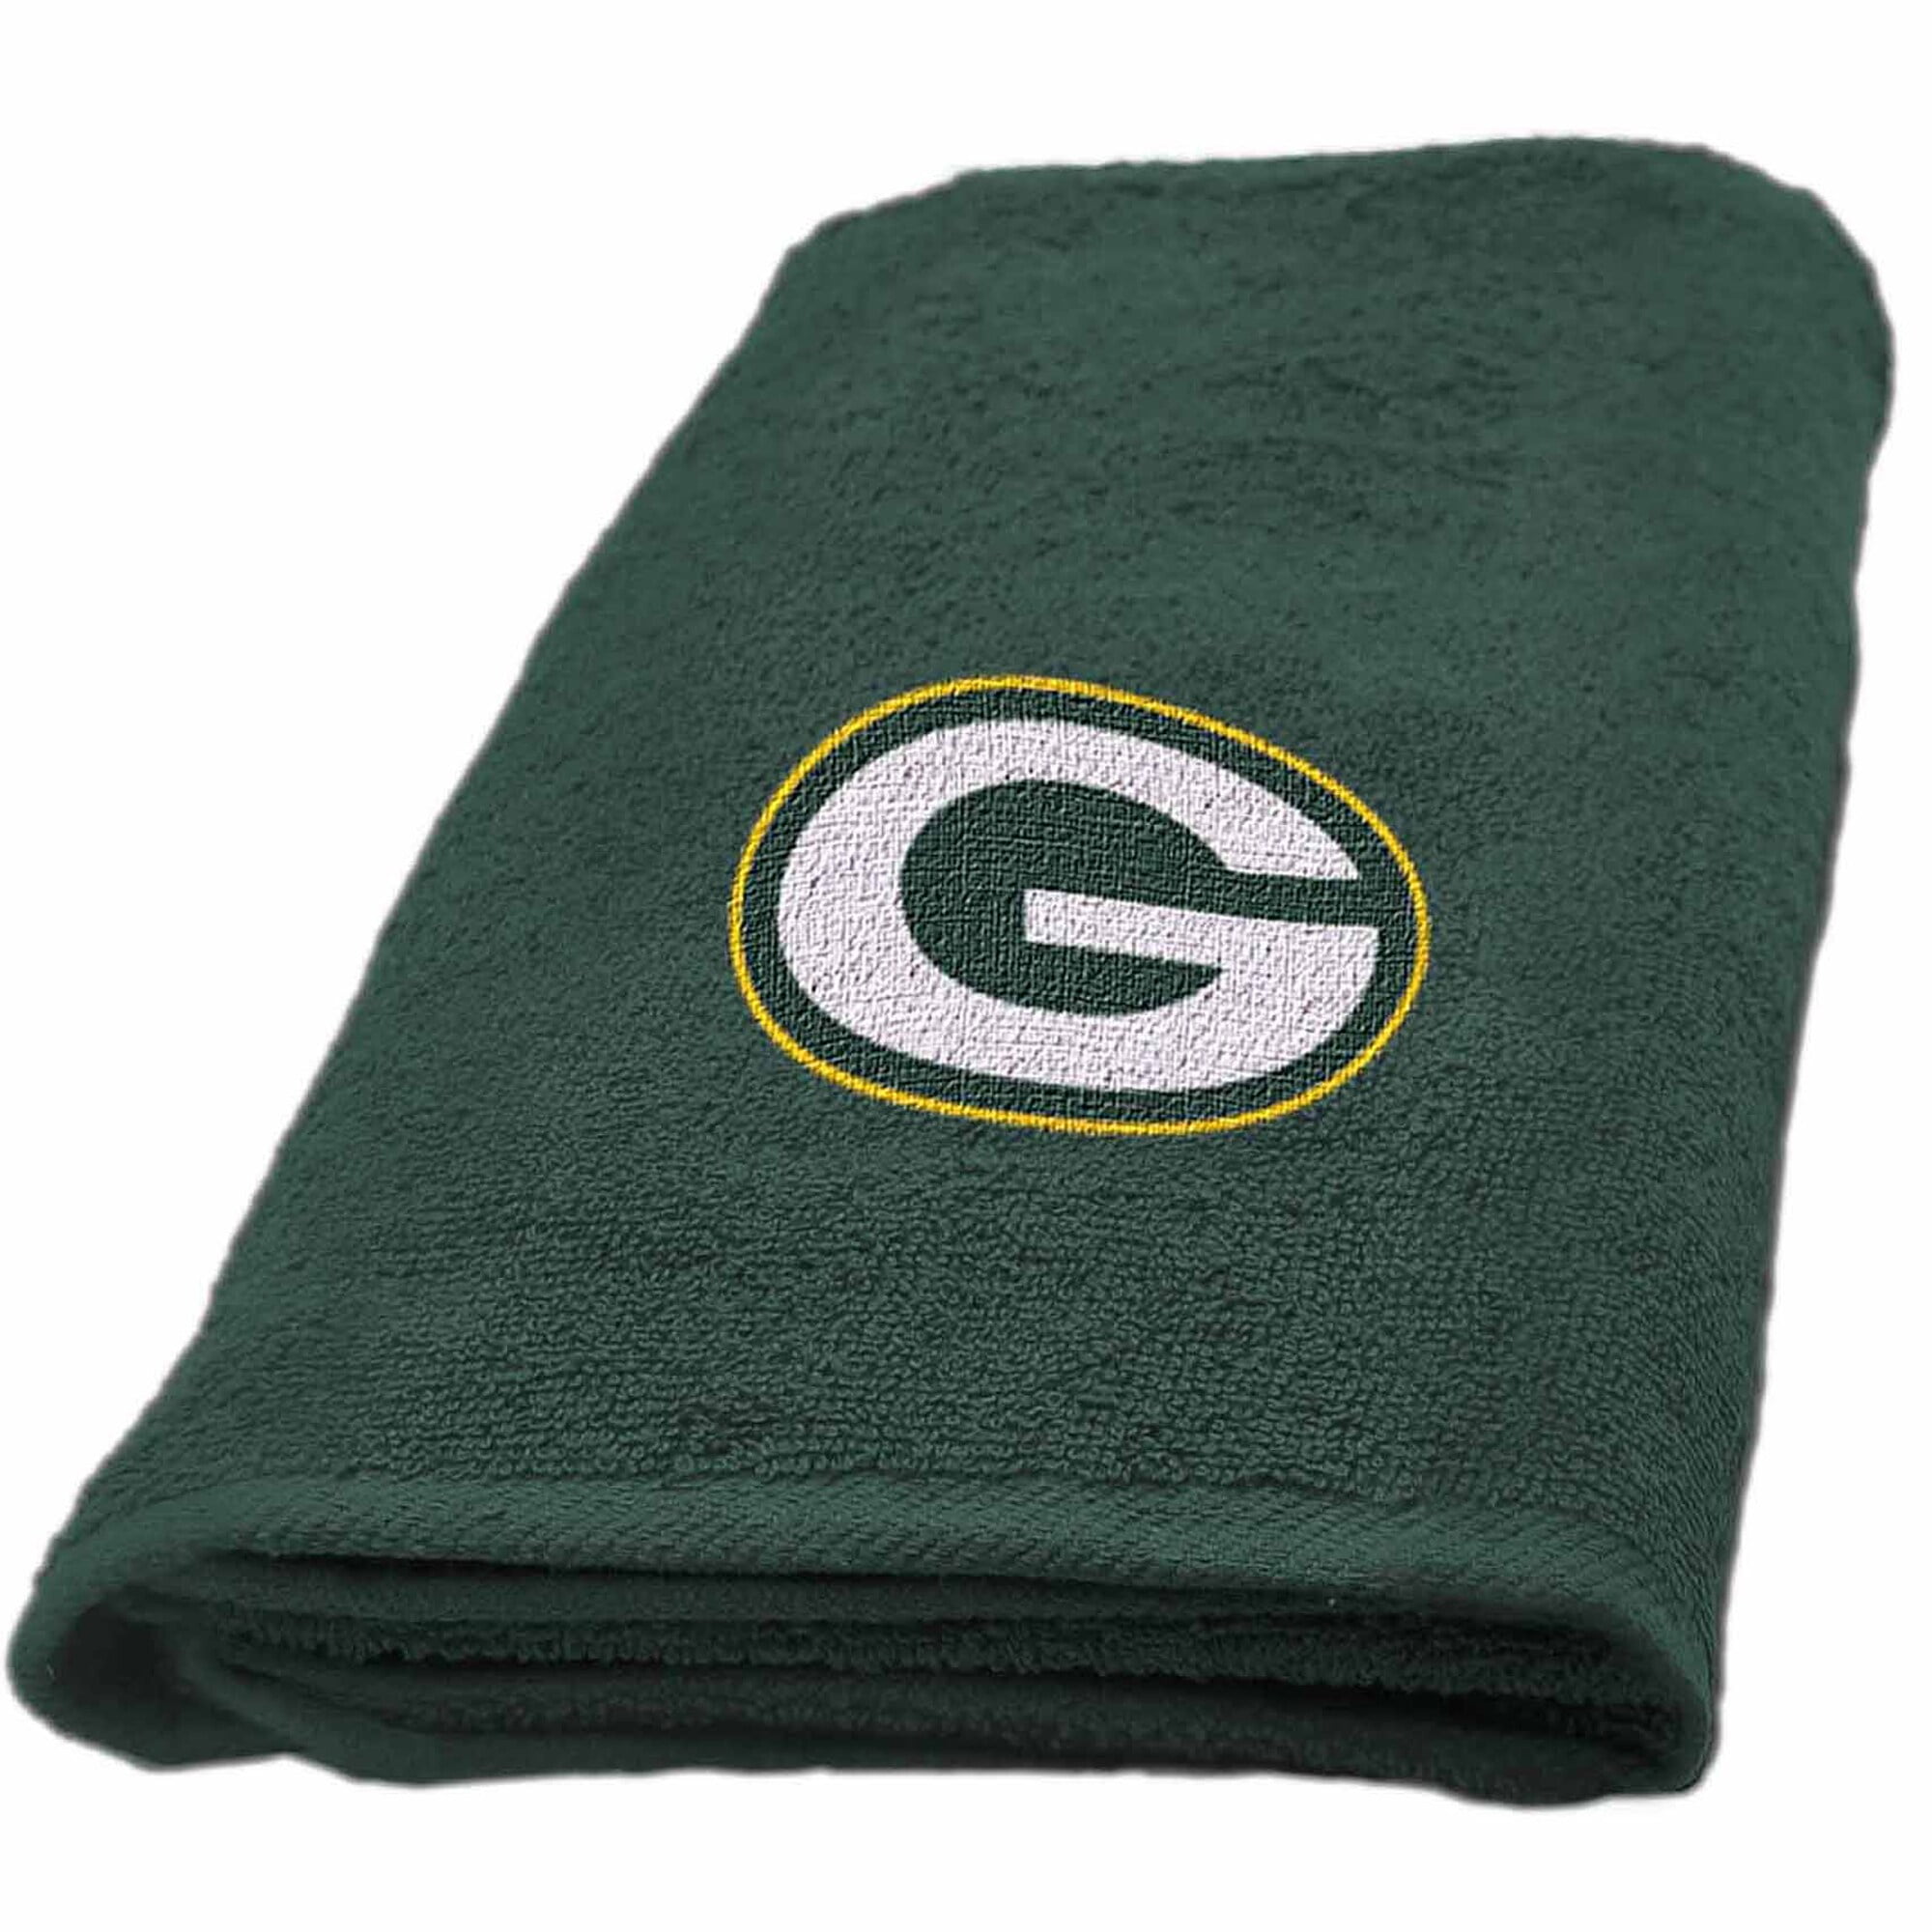 Set 2 handmade cloth top hanging kitchen towels Green Bay Packers football NEW 